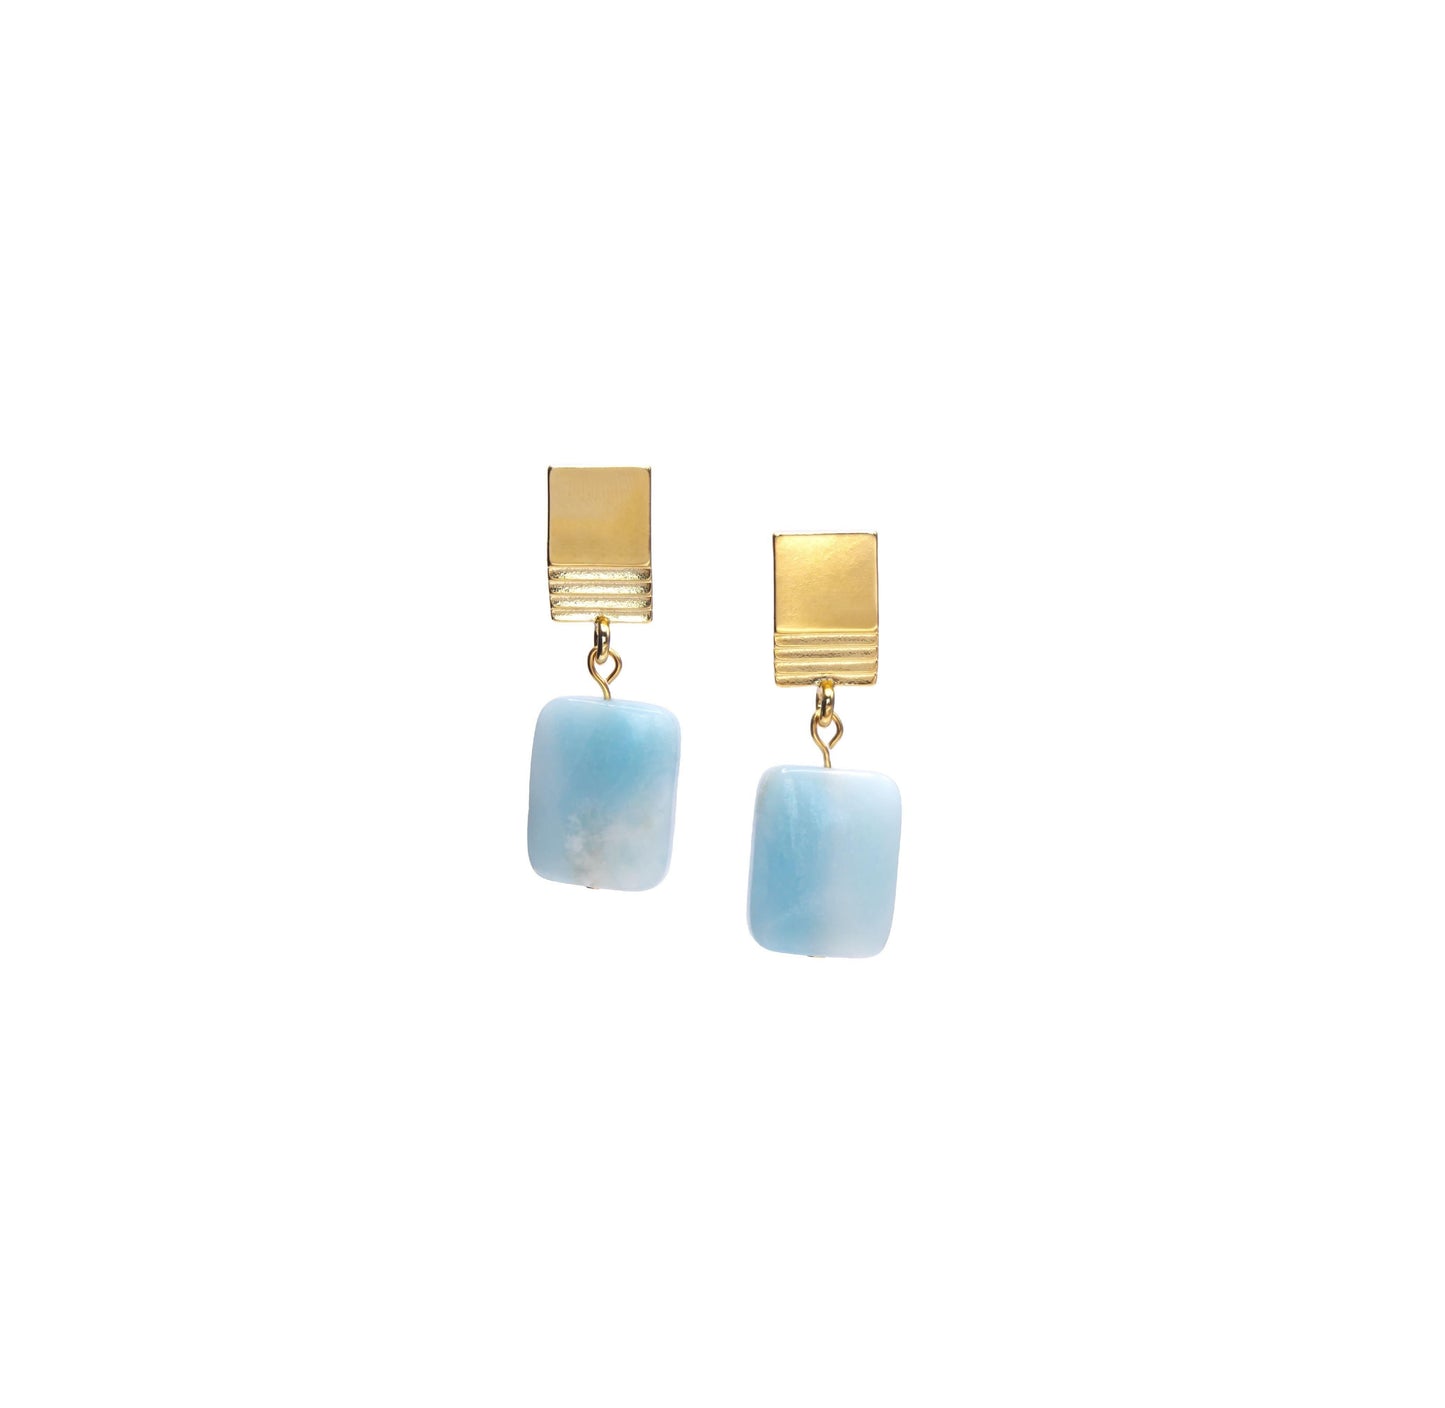 gold layered square + amazonite earrings - gold layered square + amazonite earrings - VUE by SEK